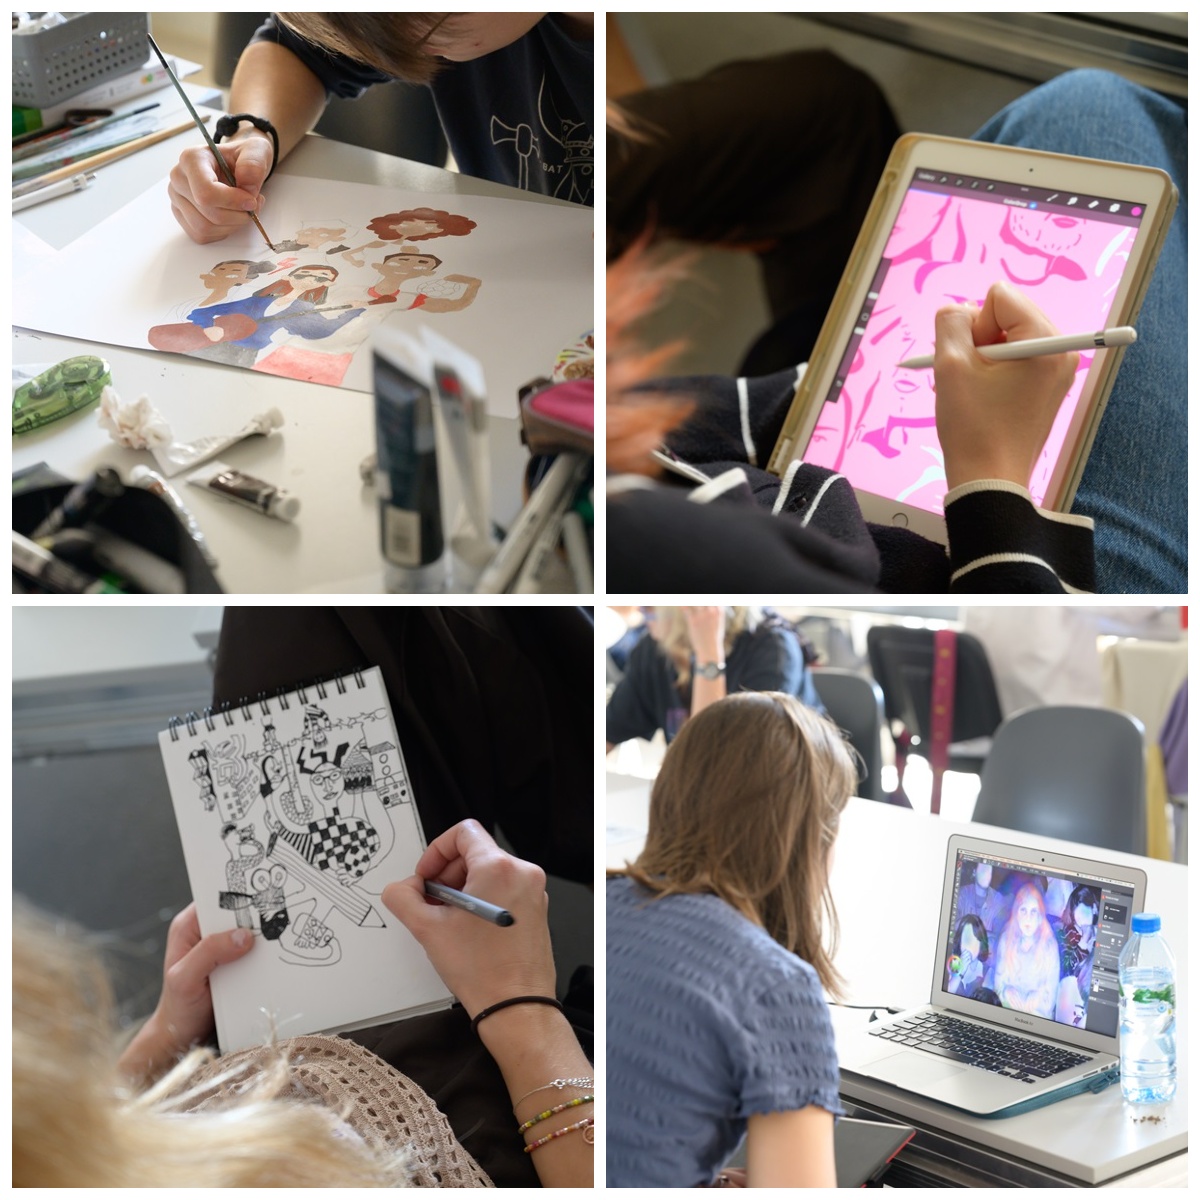 Photo collage. From top: A hand holding a paintbrush with which she paints silhouettes of several figures on a sheet of paper, a student designing graphics on a tablet, a student sketching a design in a notebook, a student designing graphics on a laptop.